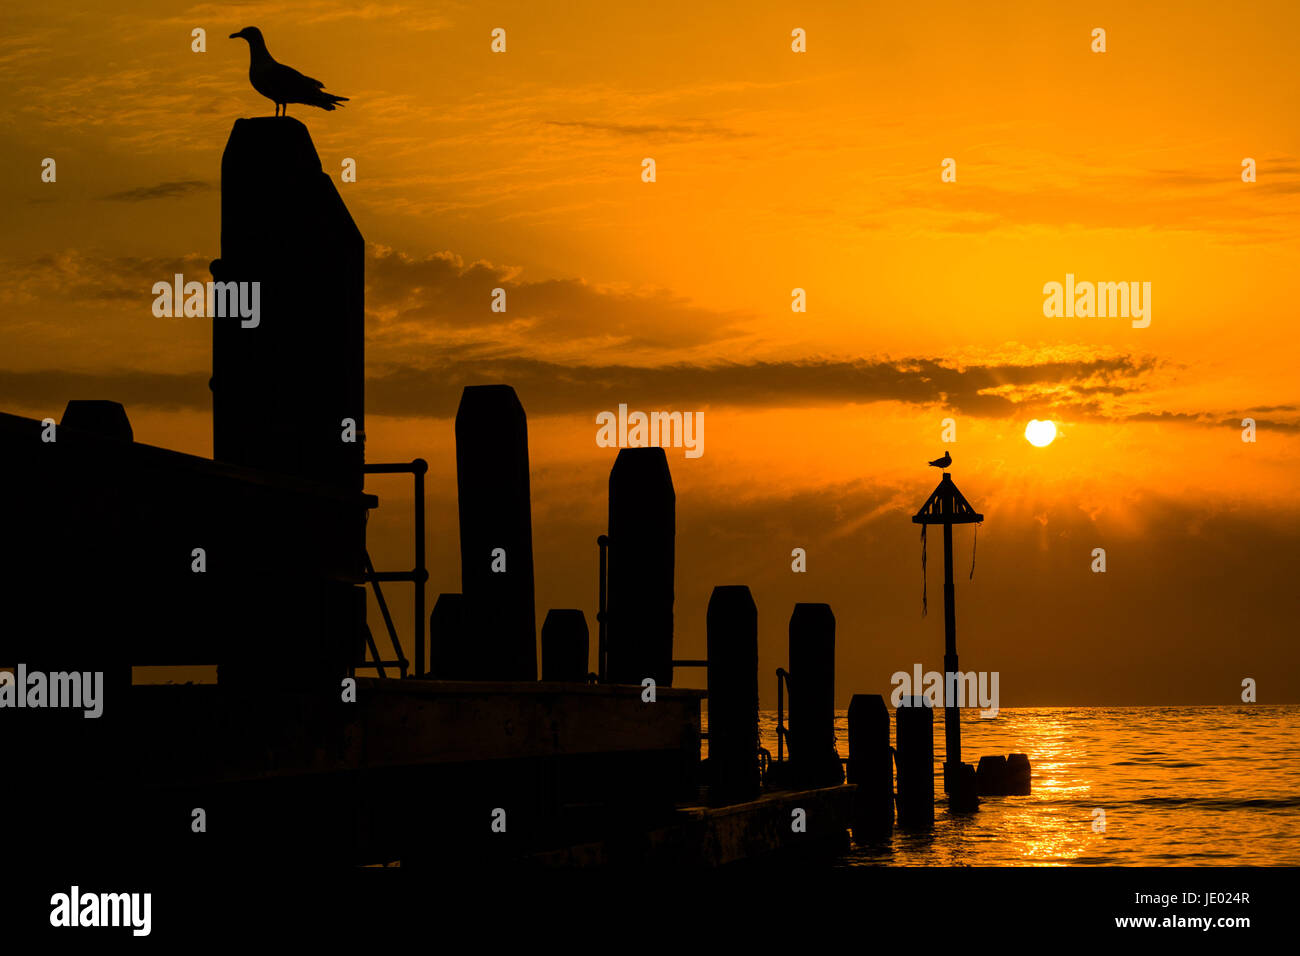 Aberystwyth Wales UK, Wednesday 21 June 2017 UK Weather: A spectacular summer solstice sunset over the seas of Cardigan Bay in Aberystwyth, Wales at the end of the longest day of the year Credit: keith morris/Alamy Live News Stock Photo